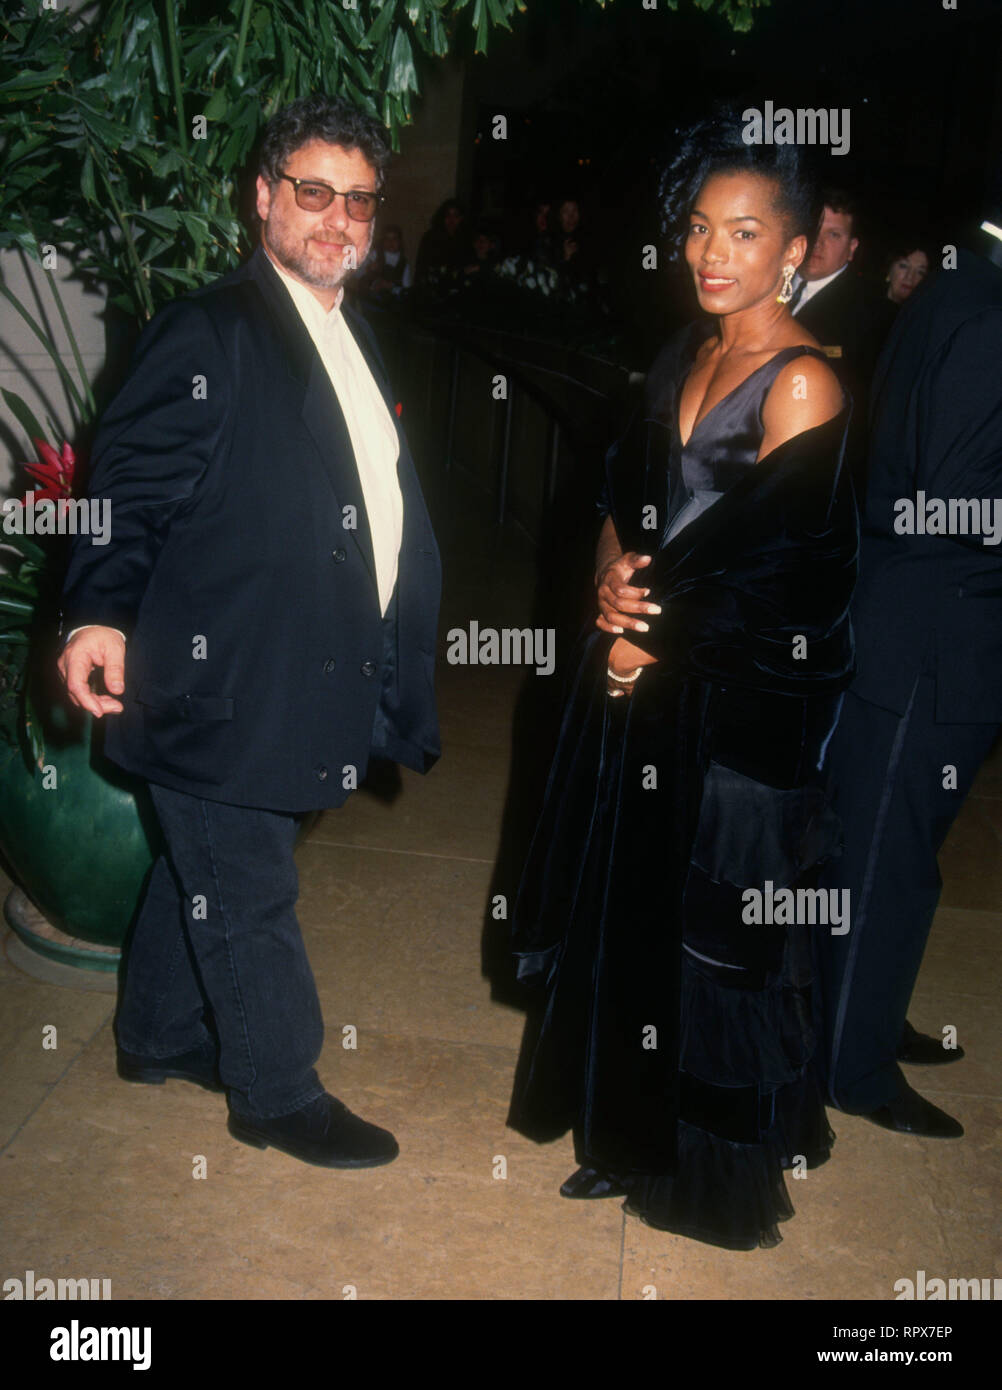 BEVERLY HILLS, CA - JANUARY 22: Manager Barry Krost and actress Angela Bassett attend the 51st Annual Golden Globe Awards on January 22, 1994 at the Beverly Hilton Hotel in Beverly Hills, California. Photo by Barry King/Alamy Stock Photo Stock Photo